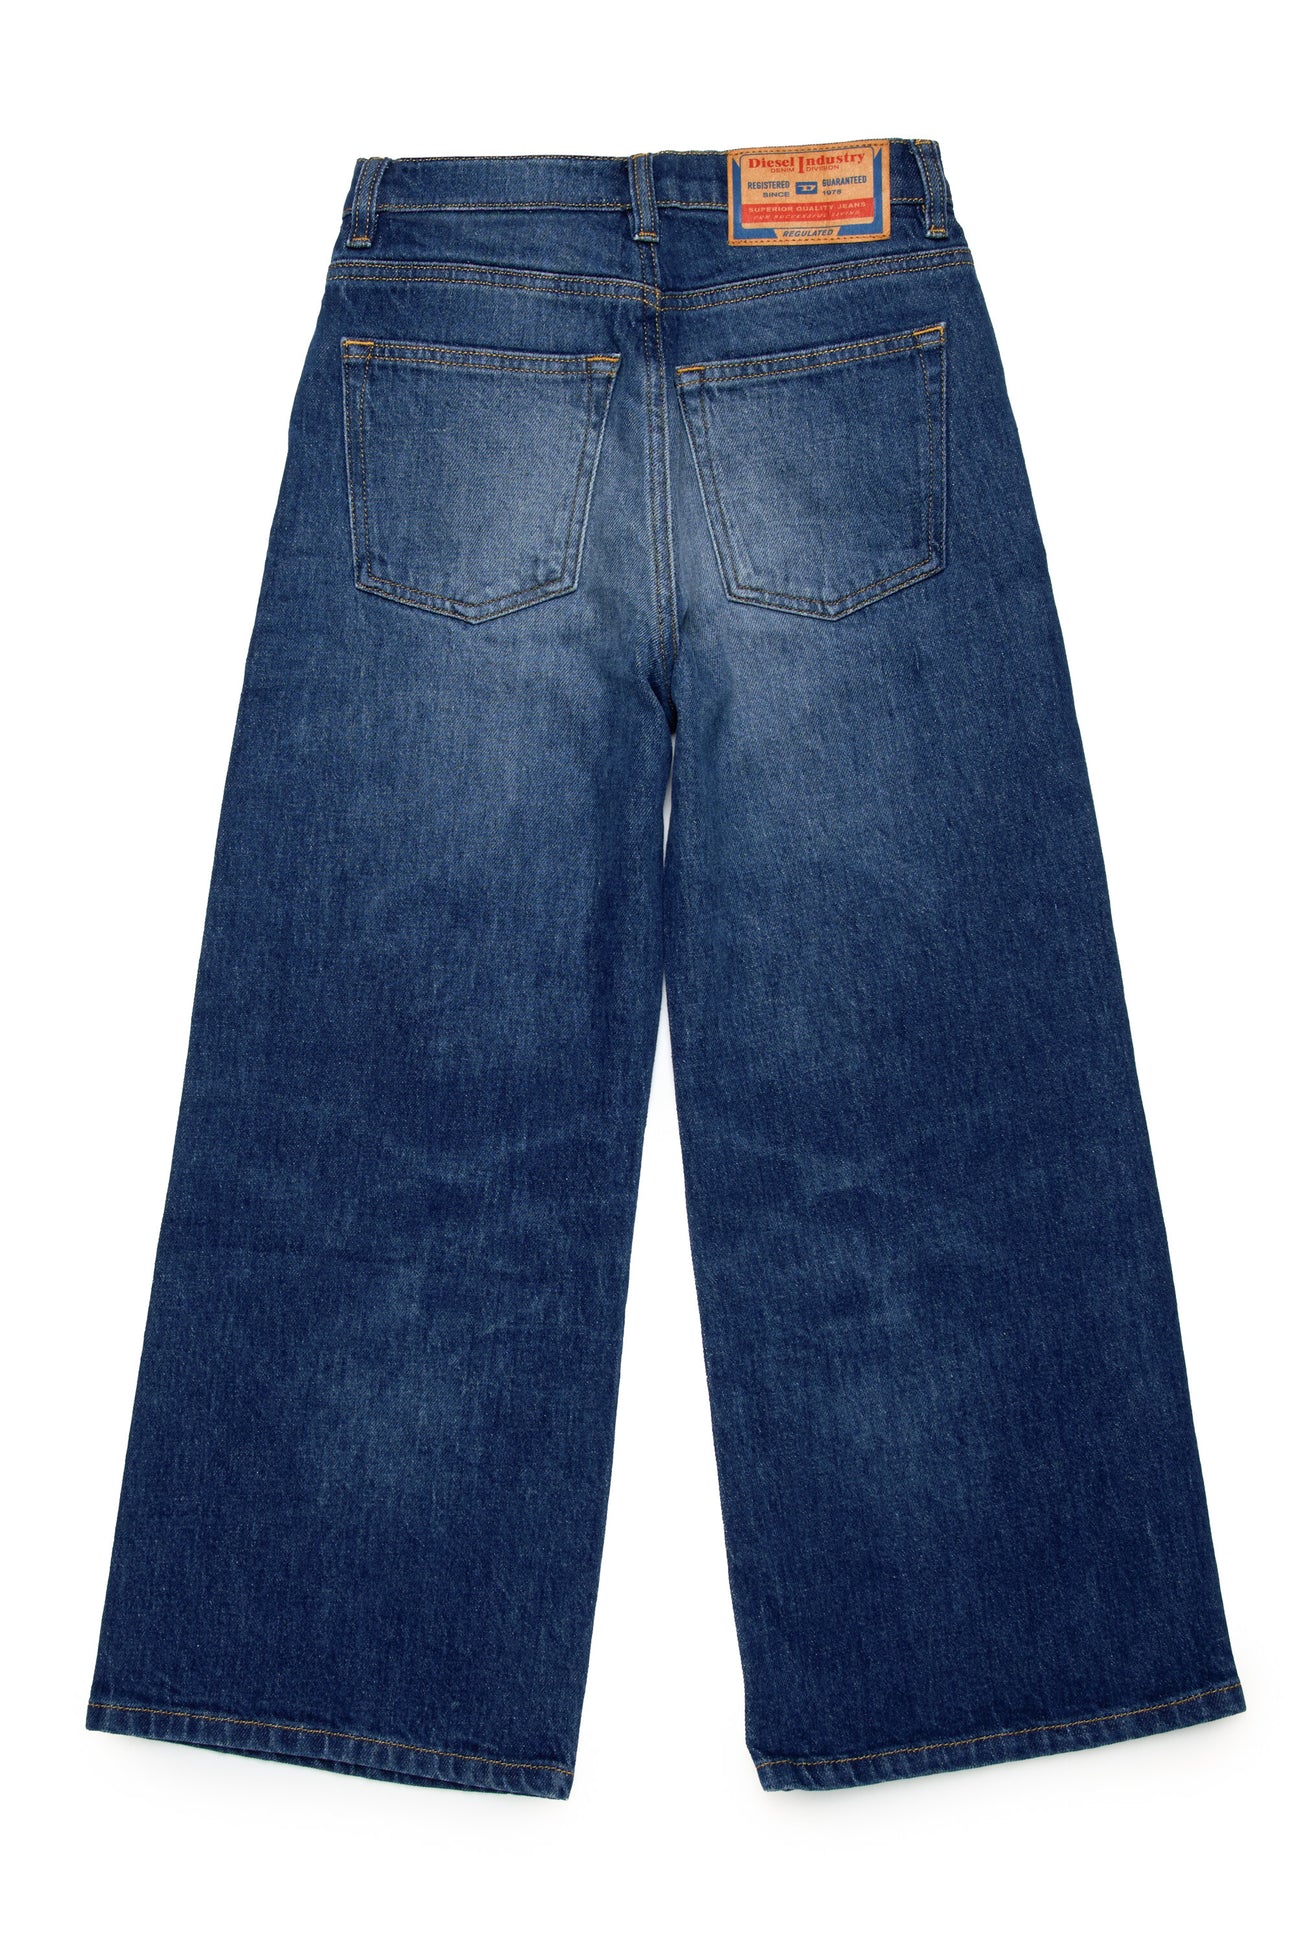 Mid blue ripped straight jeans - 1996 D-Sire Mid blue ripped straight jeans - 1996 D-Sire